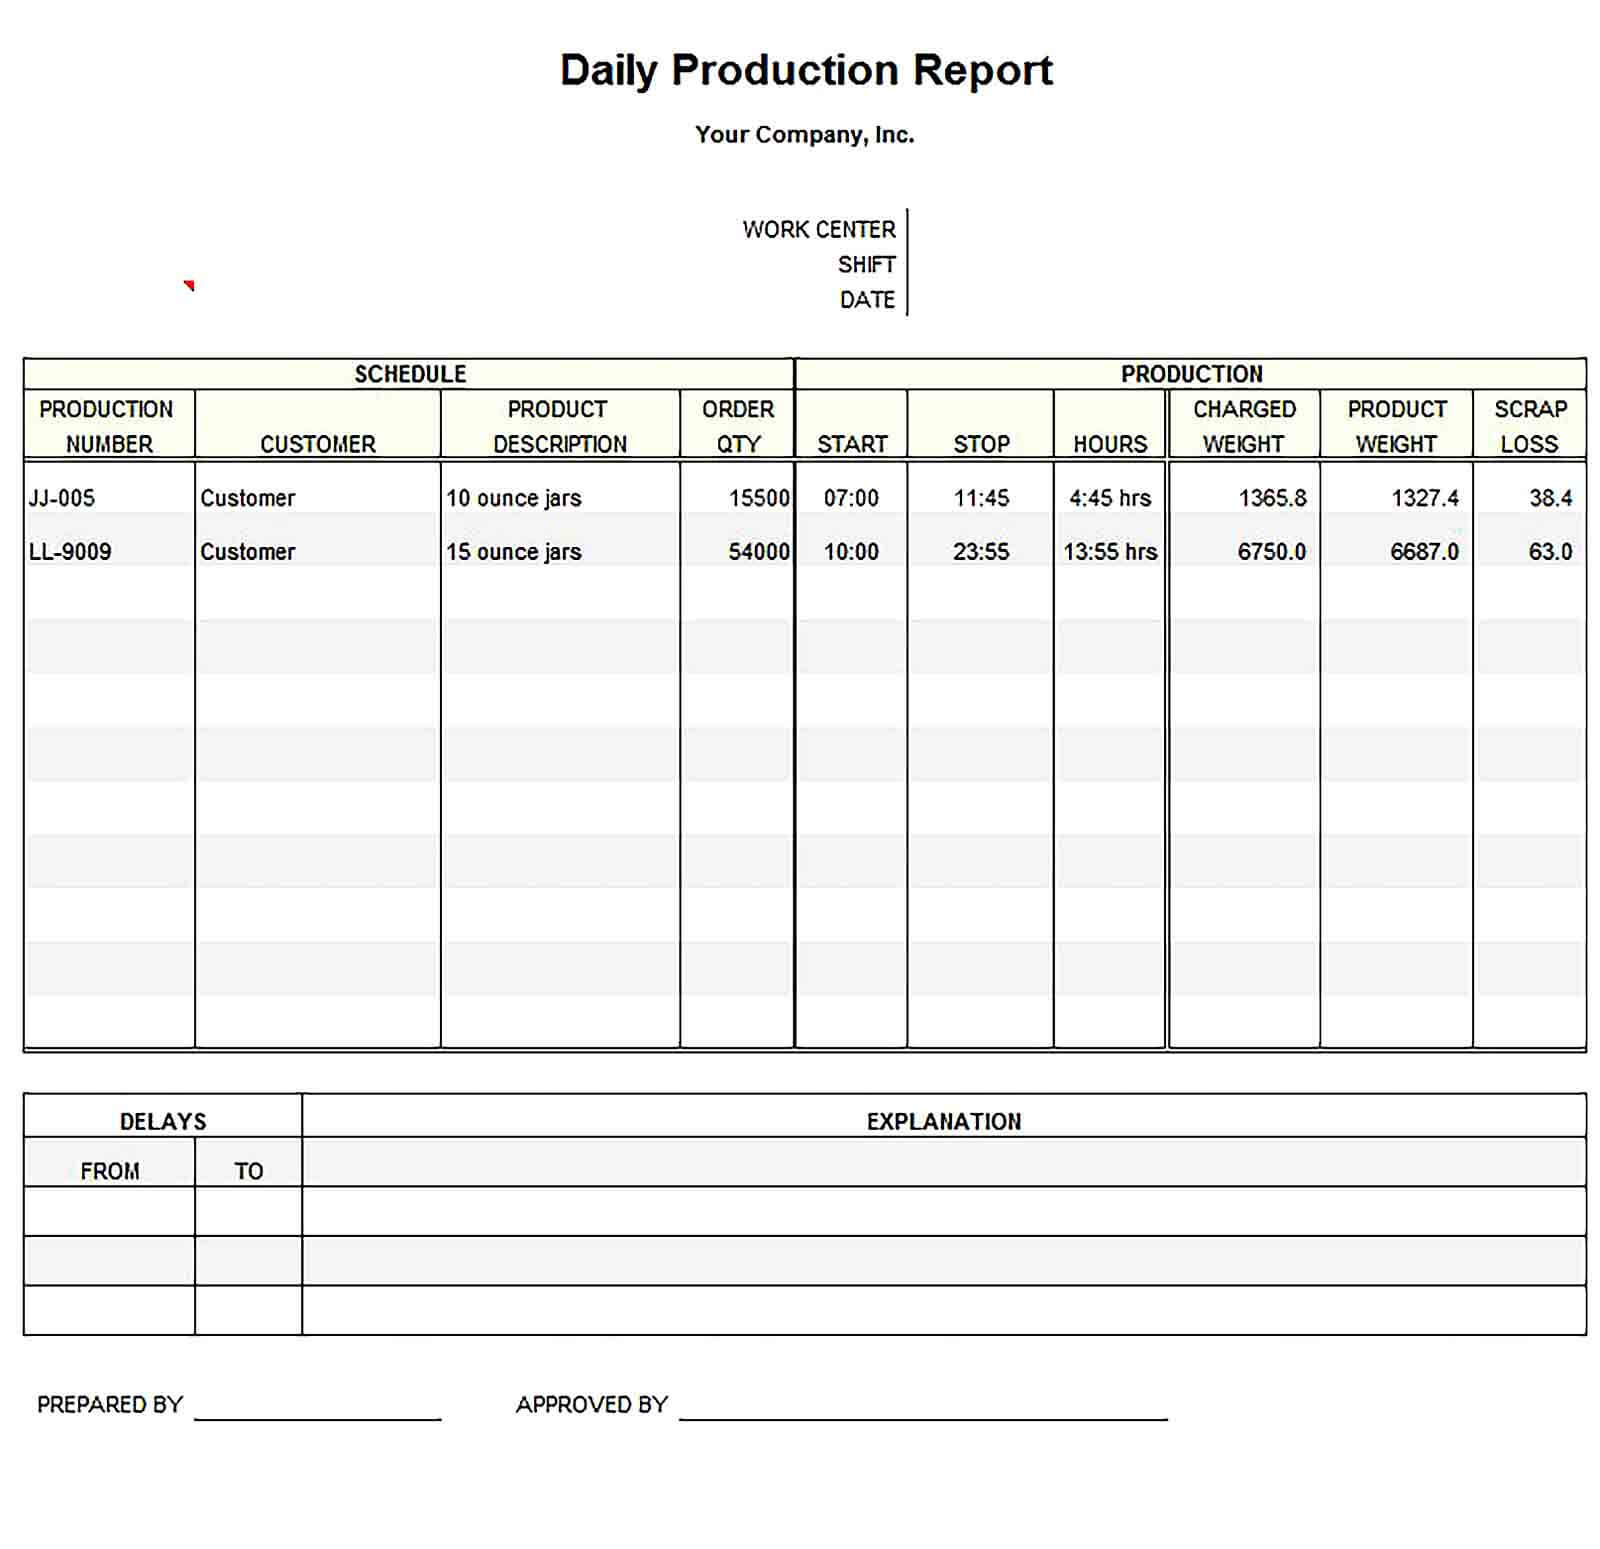 Sample Daily Production Report Template